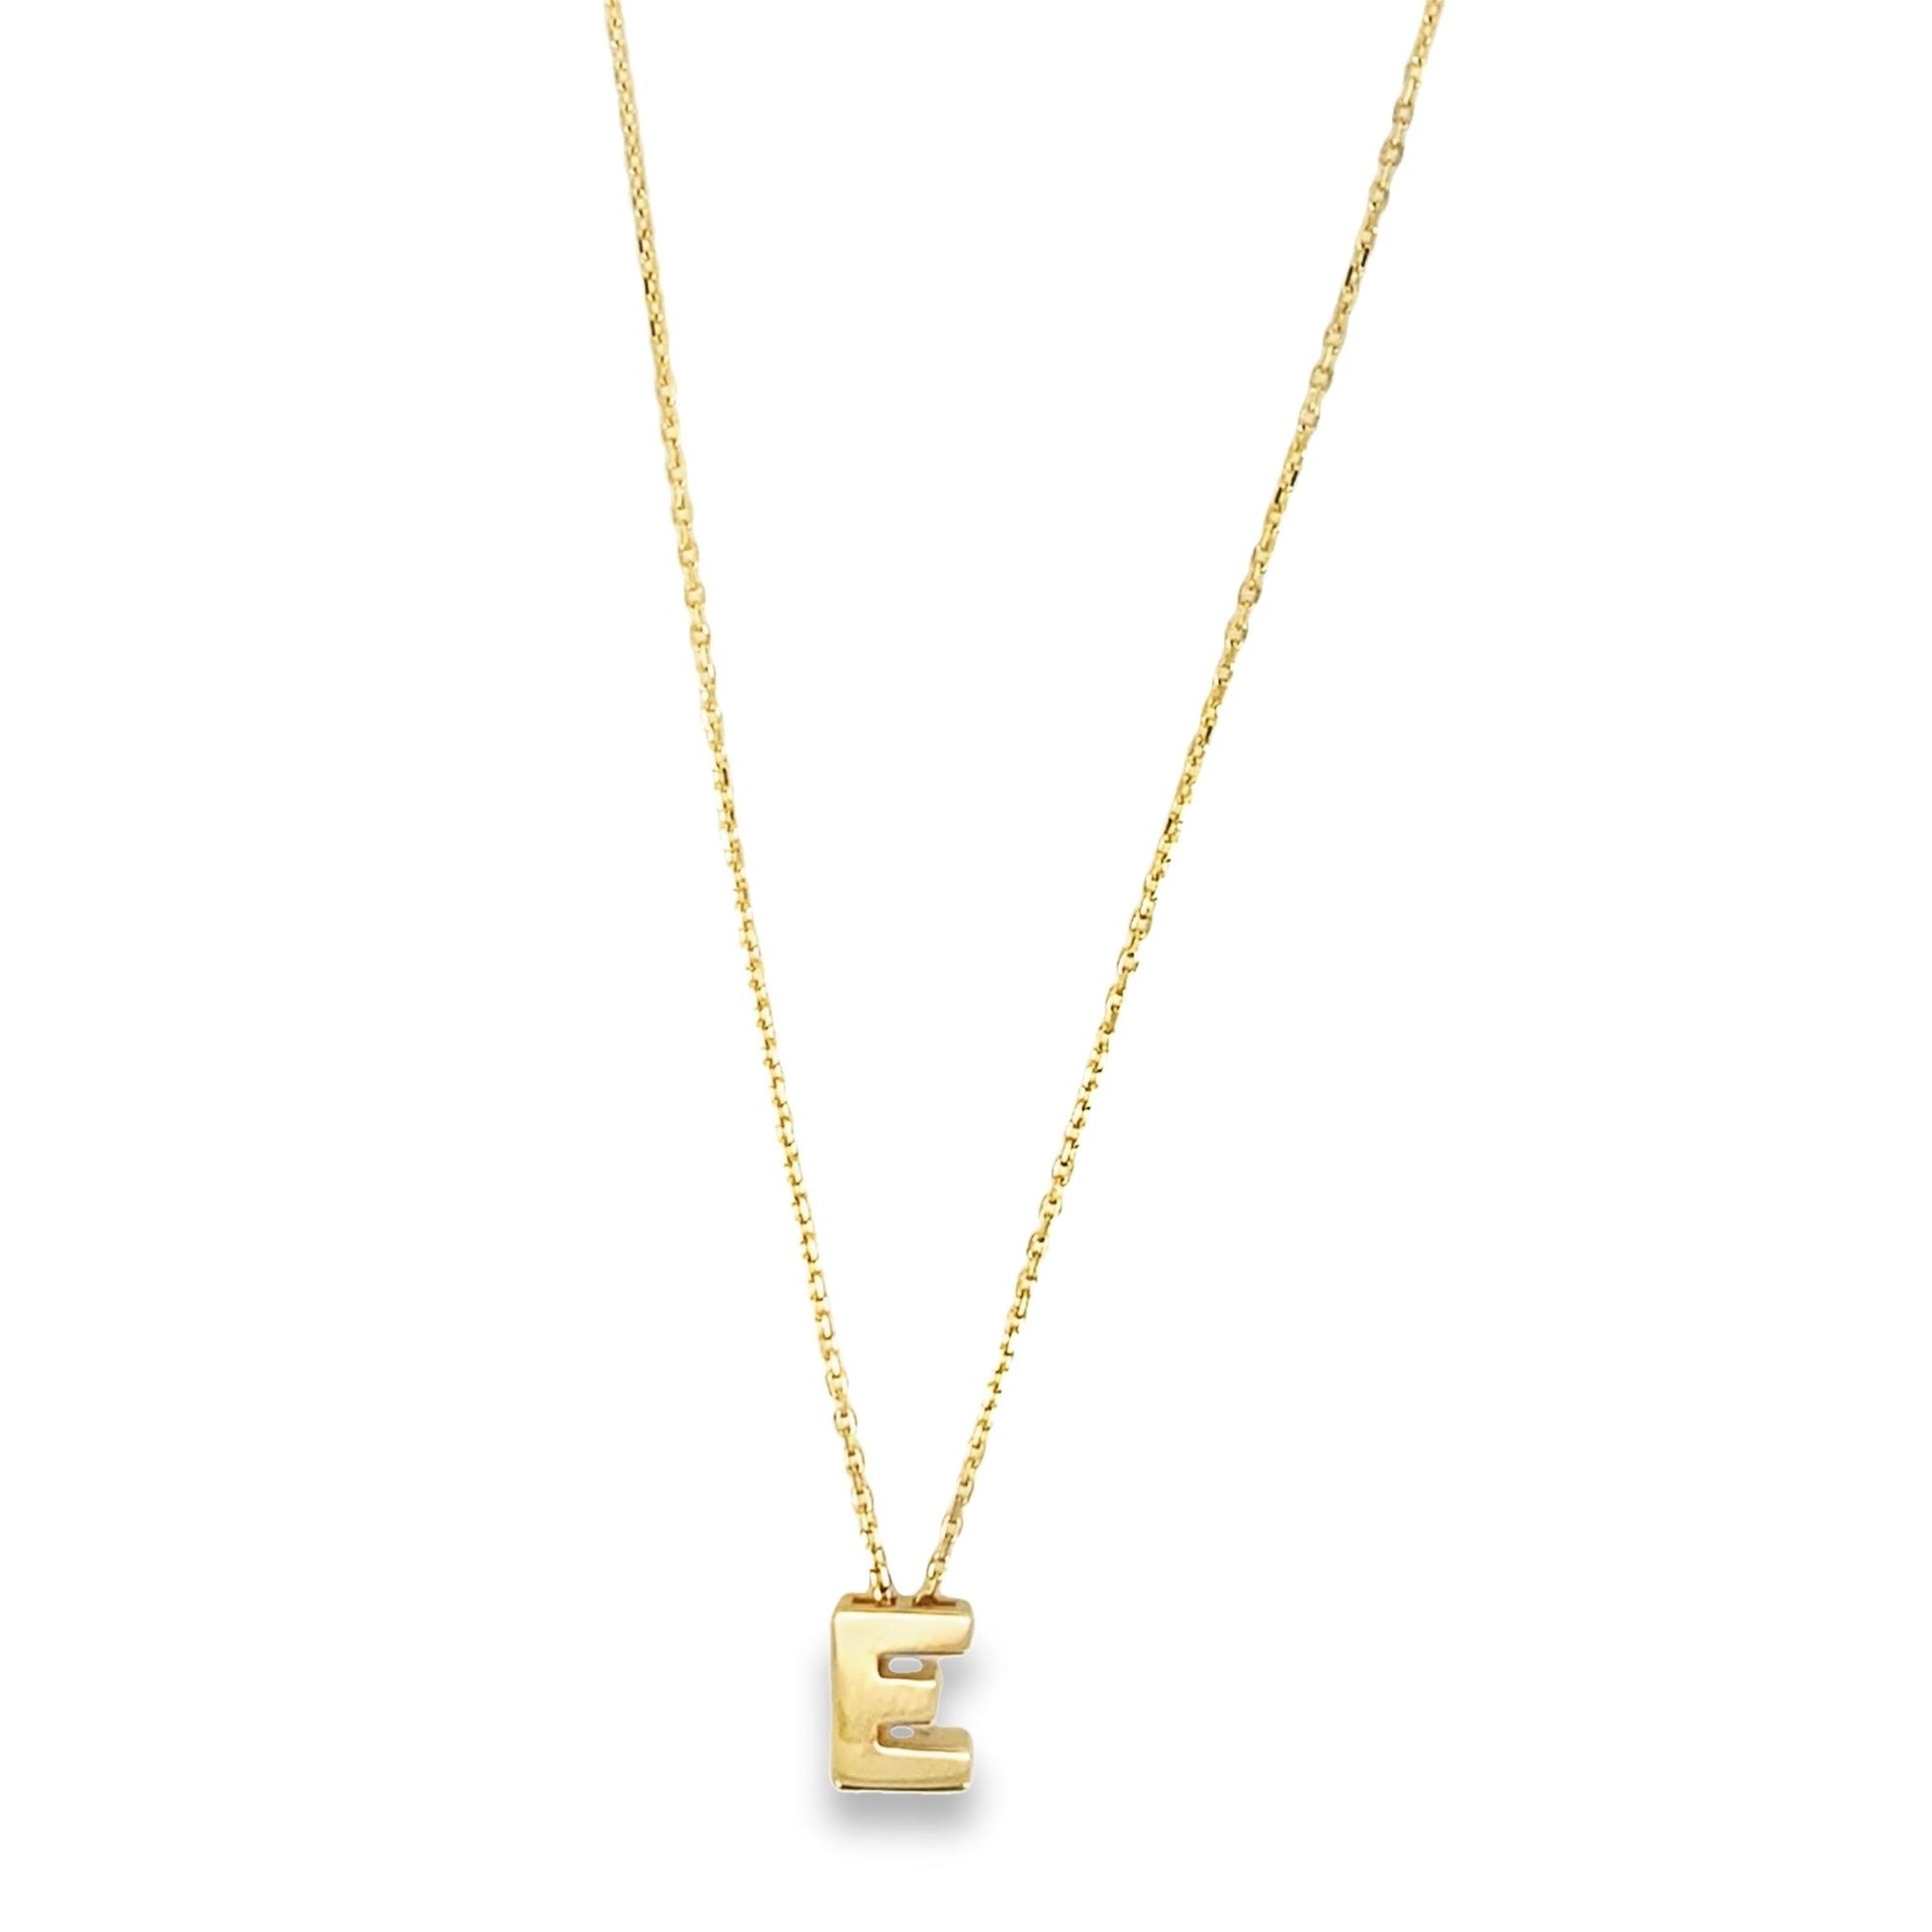 14K Yellow Gold Letter "E" Necklace 18In